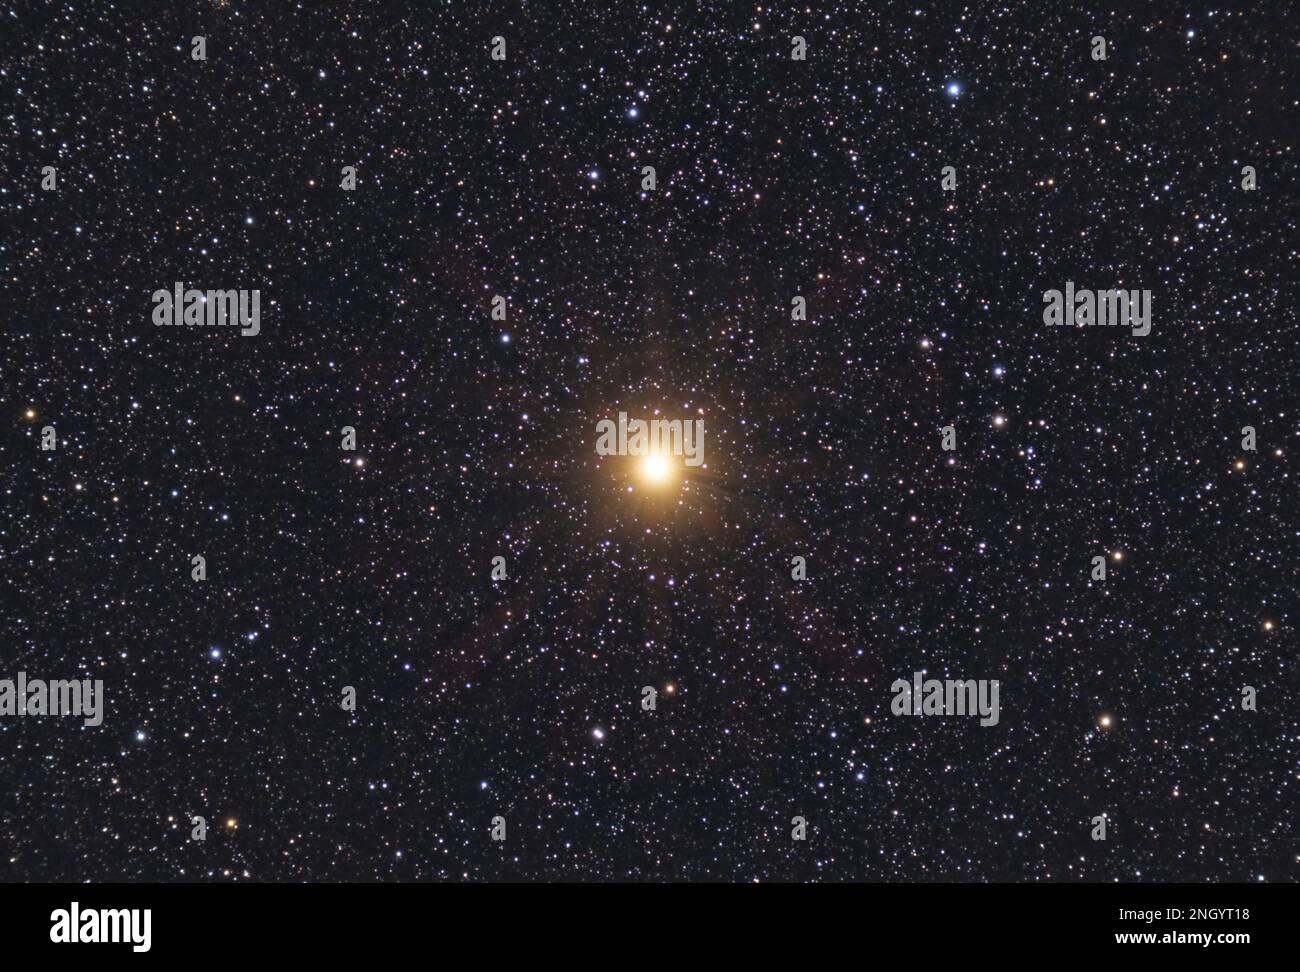 Betelgeuse a red supergiant star in the constellation Orion. Star map night sky backgrounds Stock Photo